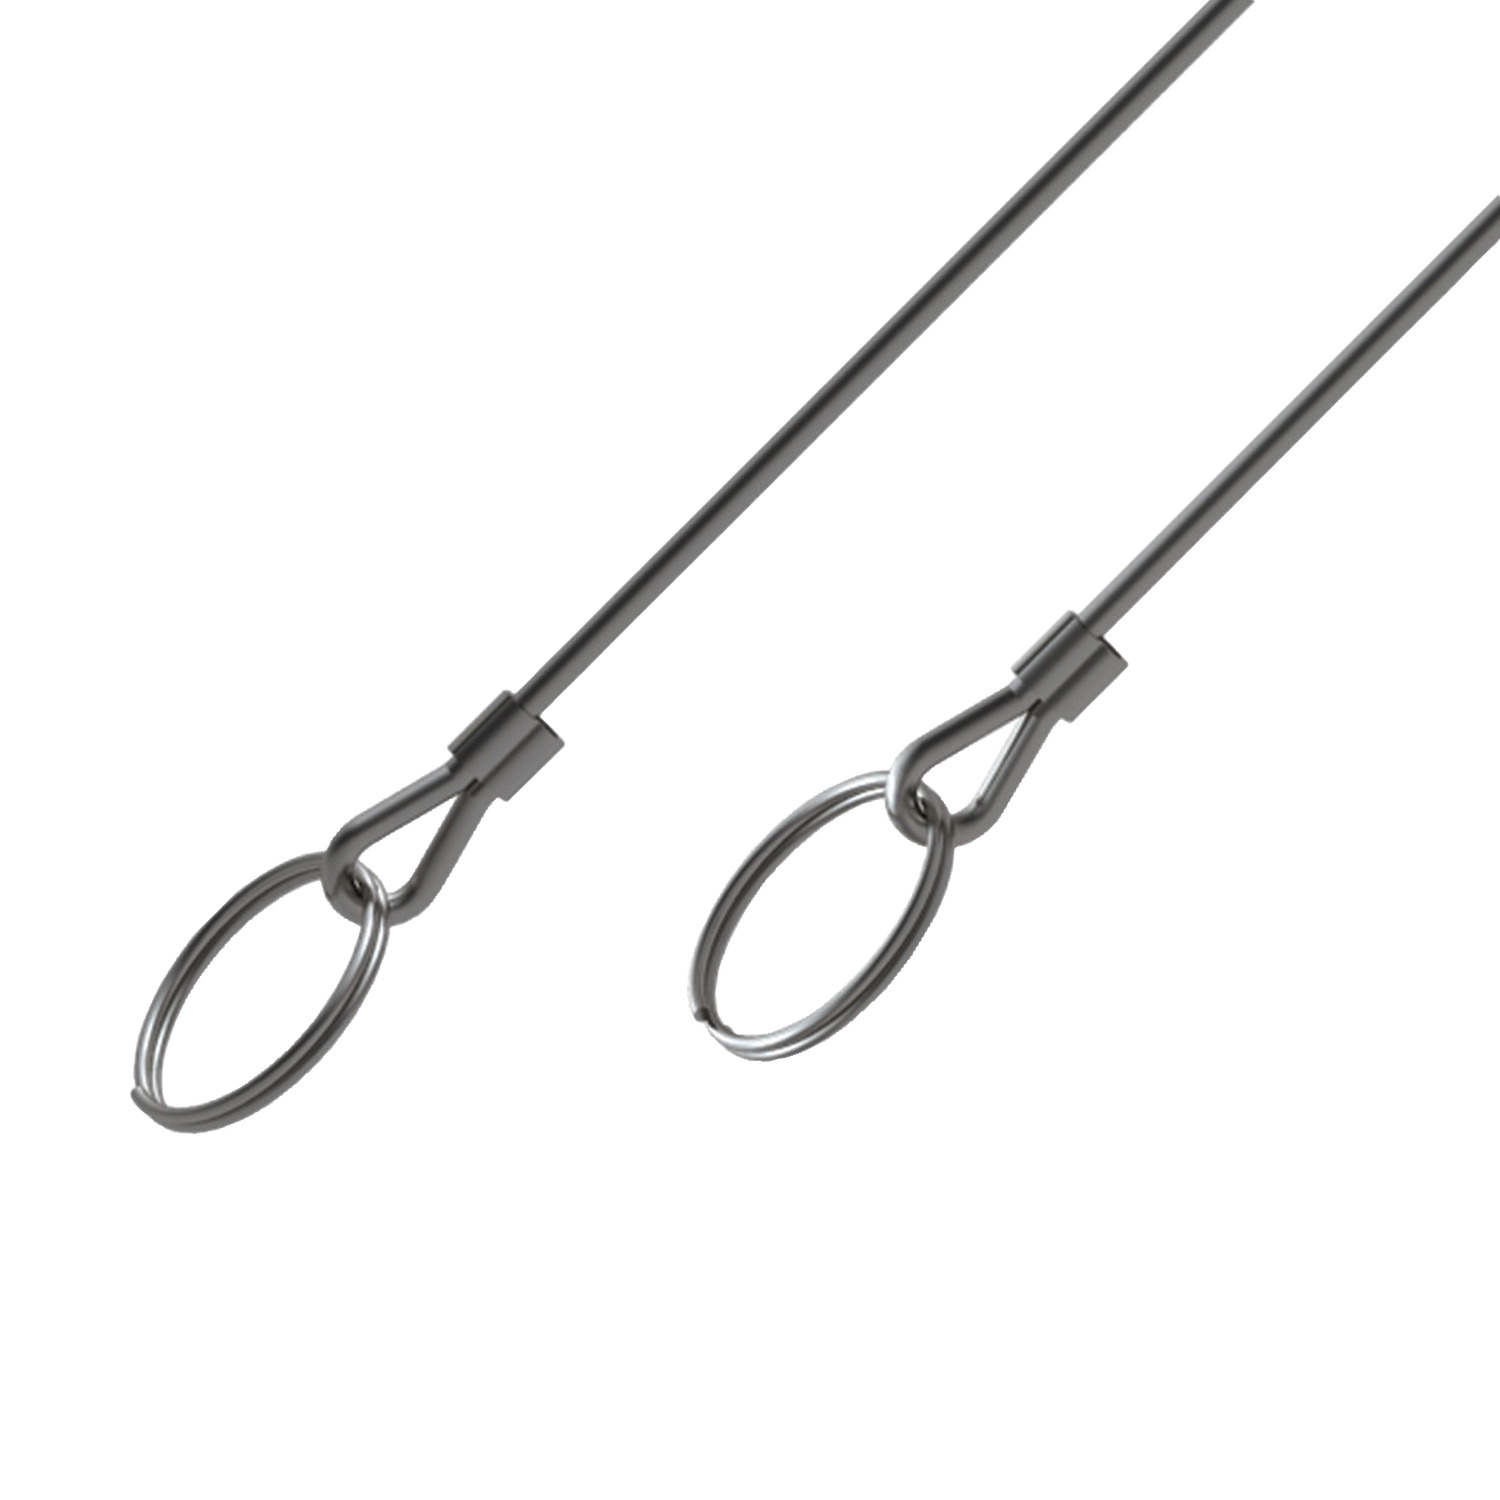 Lanyard - Loop to Loop Loop to loop style lanyard with split rings. Crimps are made frame stainless steel and are suitable up to 28Kgf. For use with our range of quick release pins.